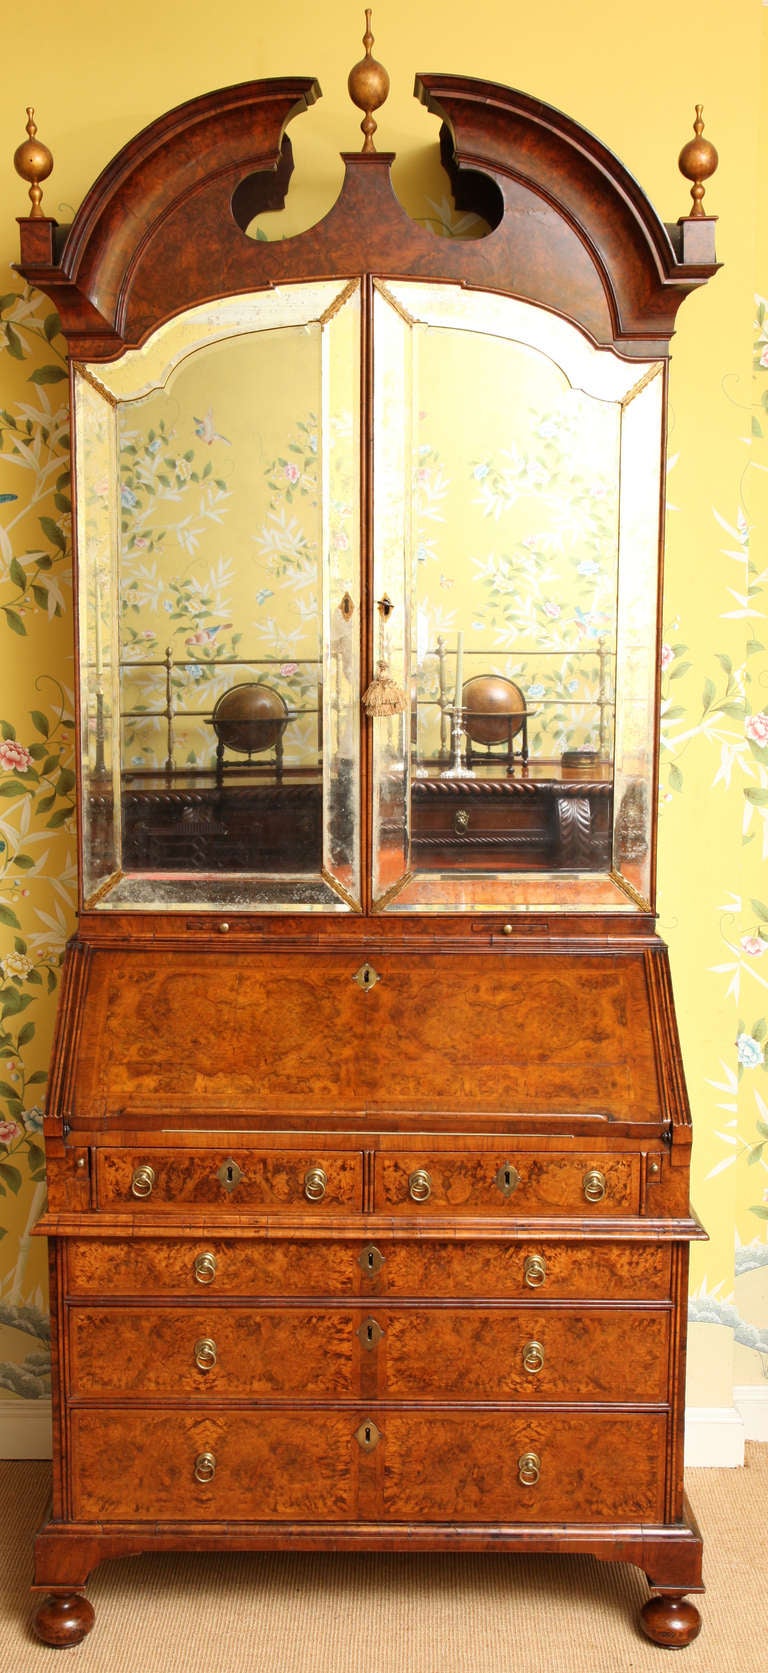 A Rare and Important Queen Anne Burl Walnut Bureau Bookcase, in three sections. The upper section having a molded broken arched pedimen with gilt finials, above a pair of arched beveled mirror doors with beveled mirrored border glass frames,  The